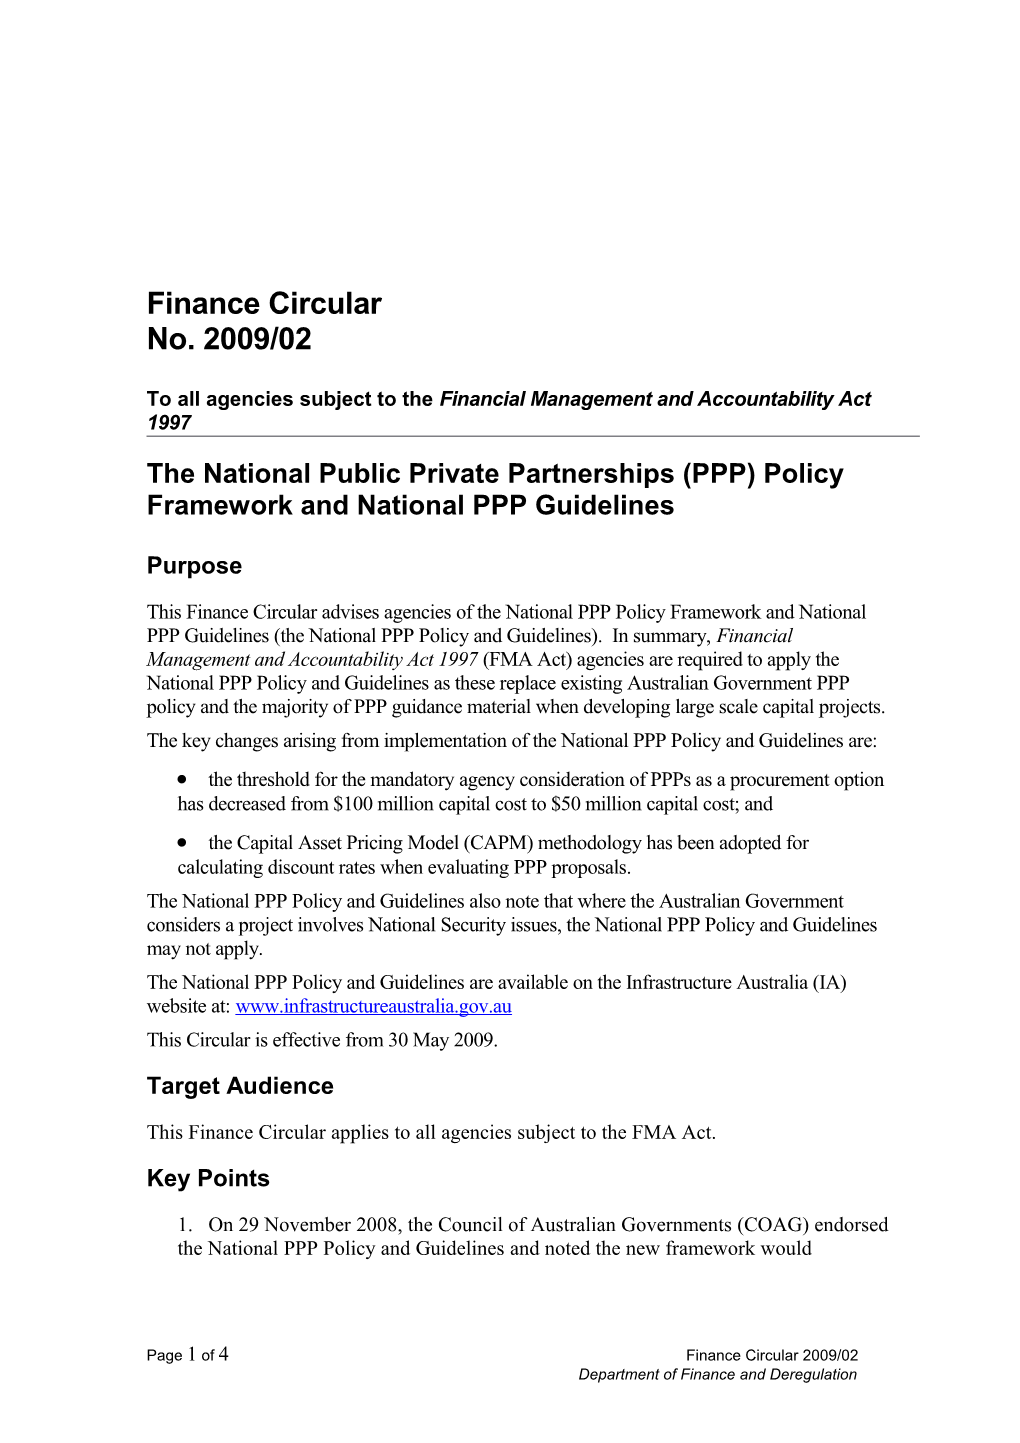 The National Public Private Partnerships (PPP) Policy Framework and National PPP Guidelines